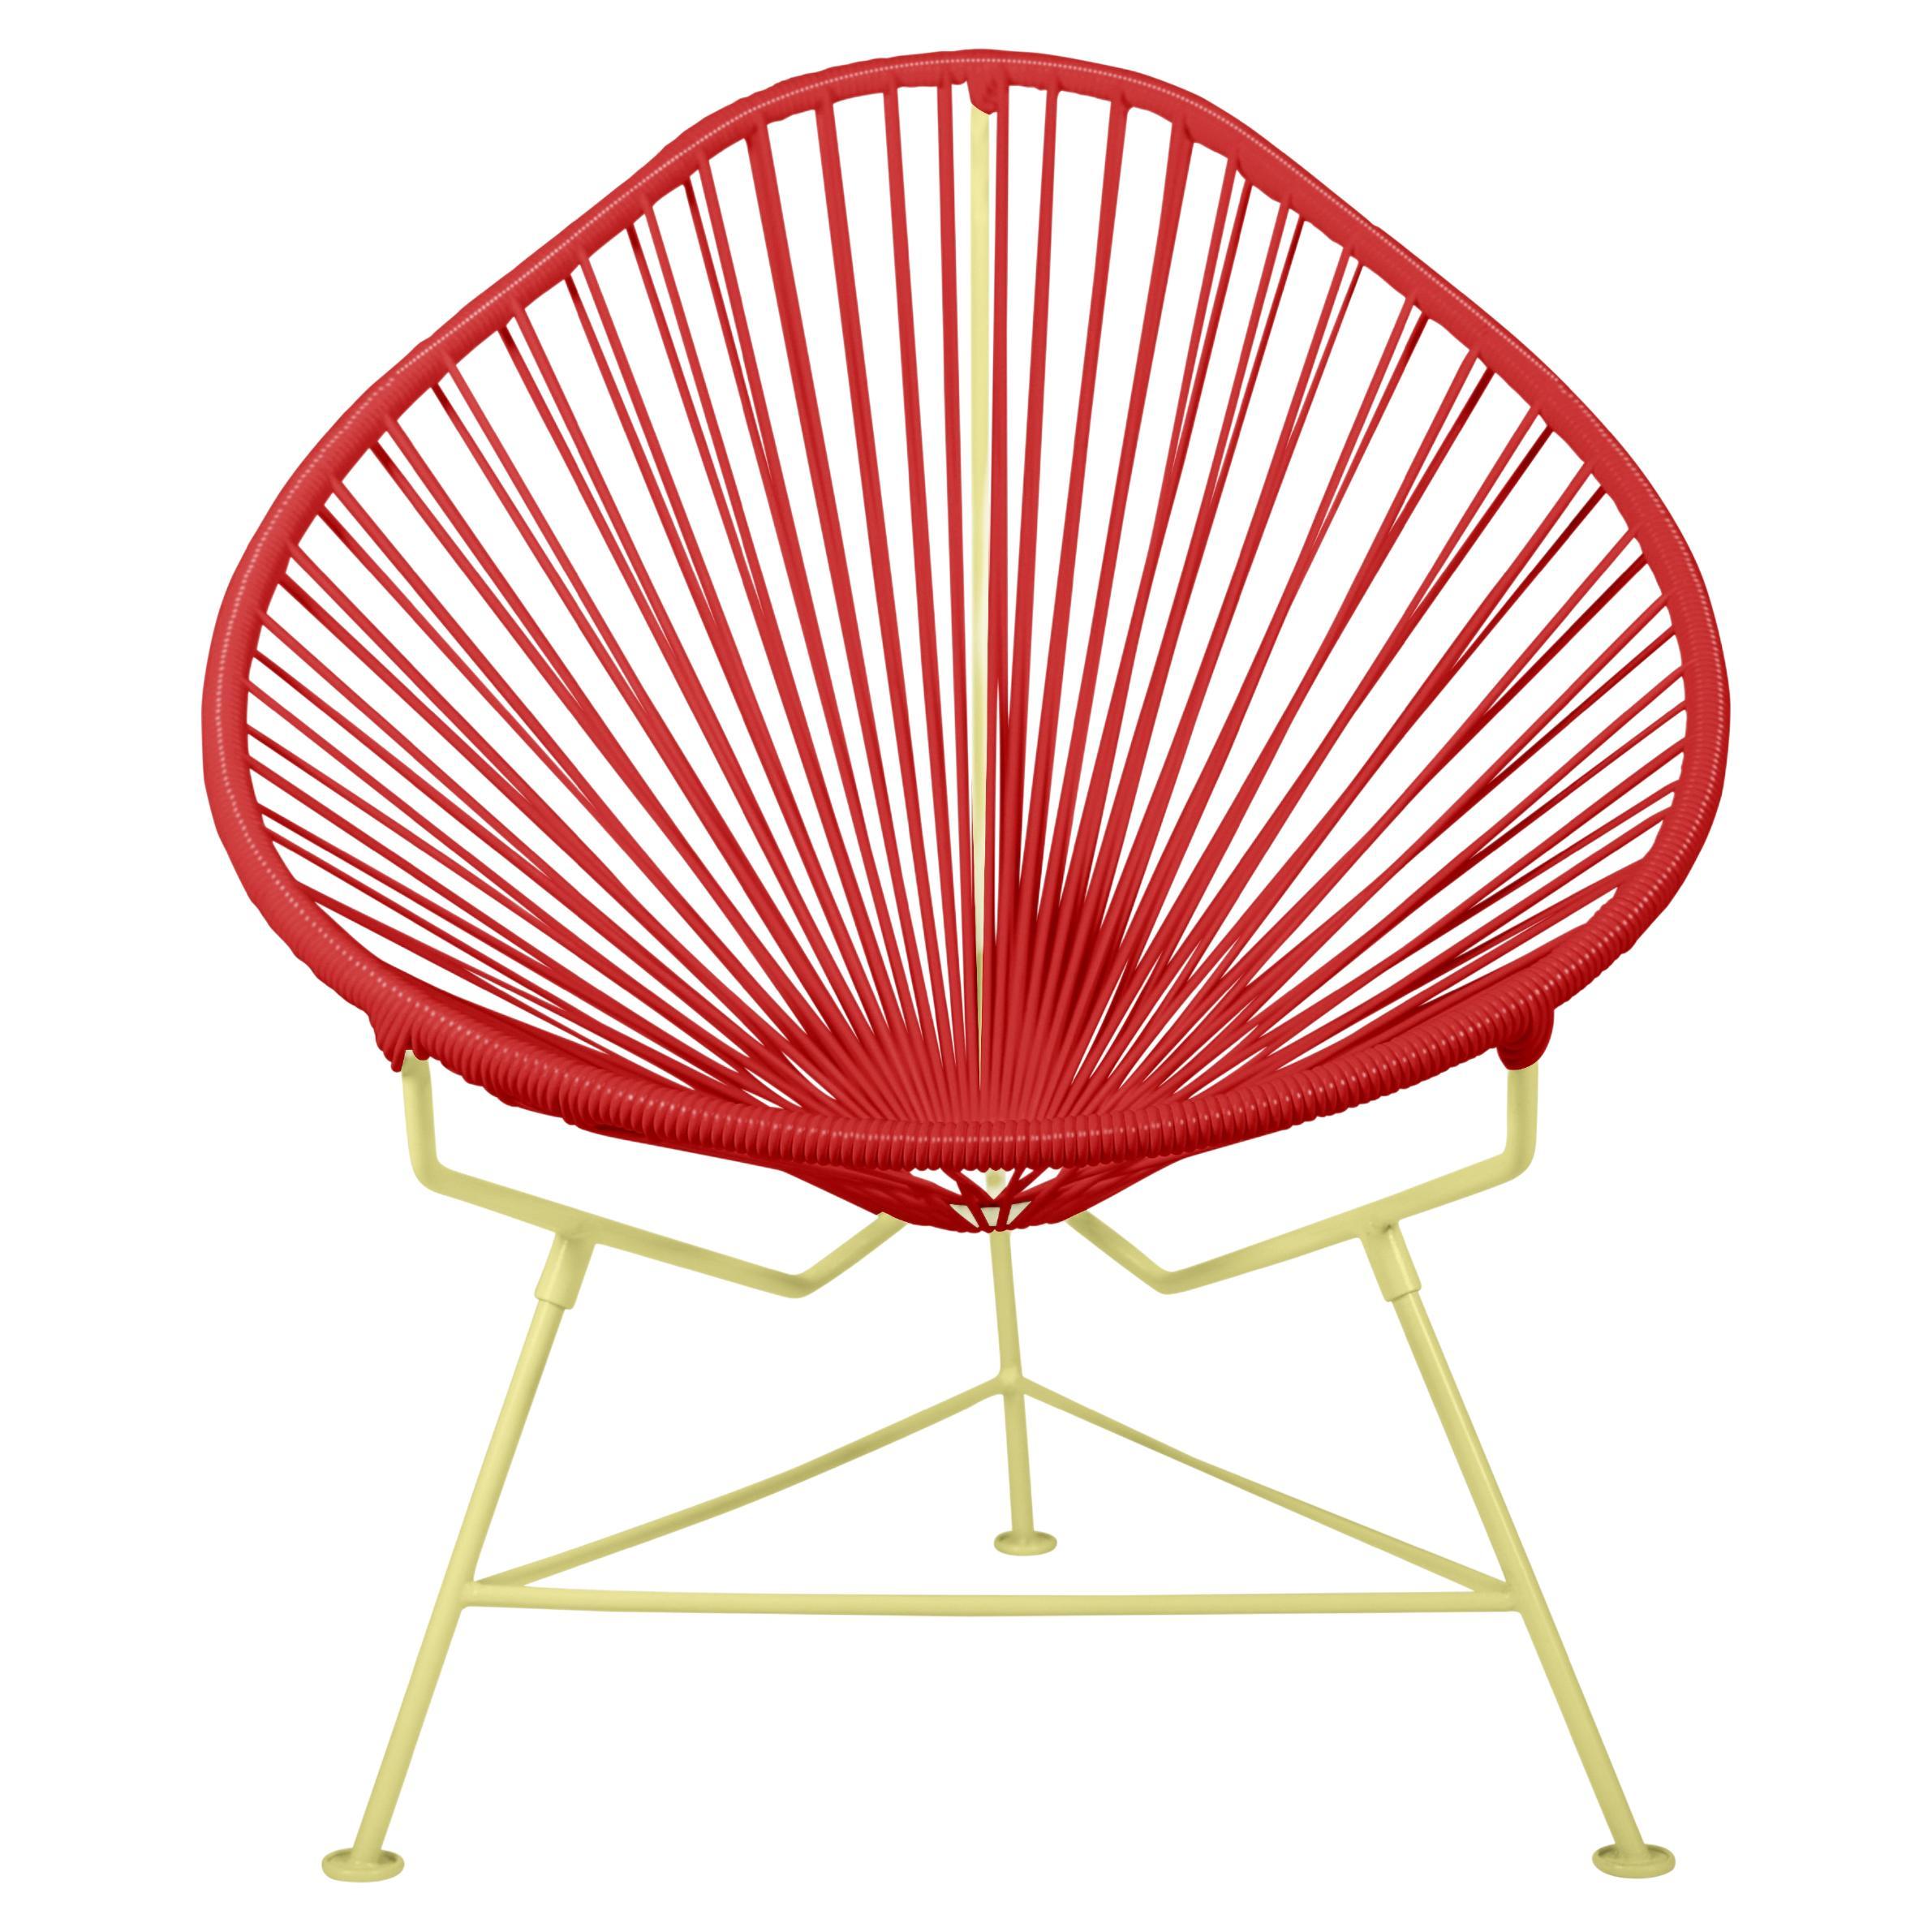 Innit Designs Acapulco Chair Red Weave on Yellow Frame